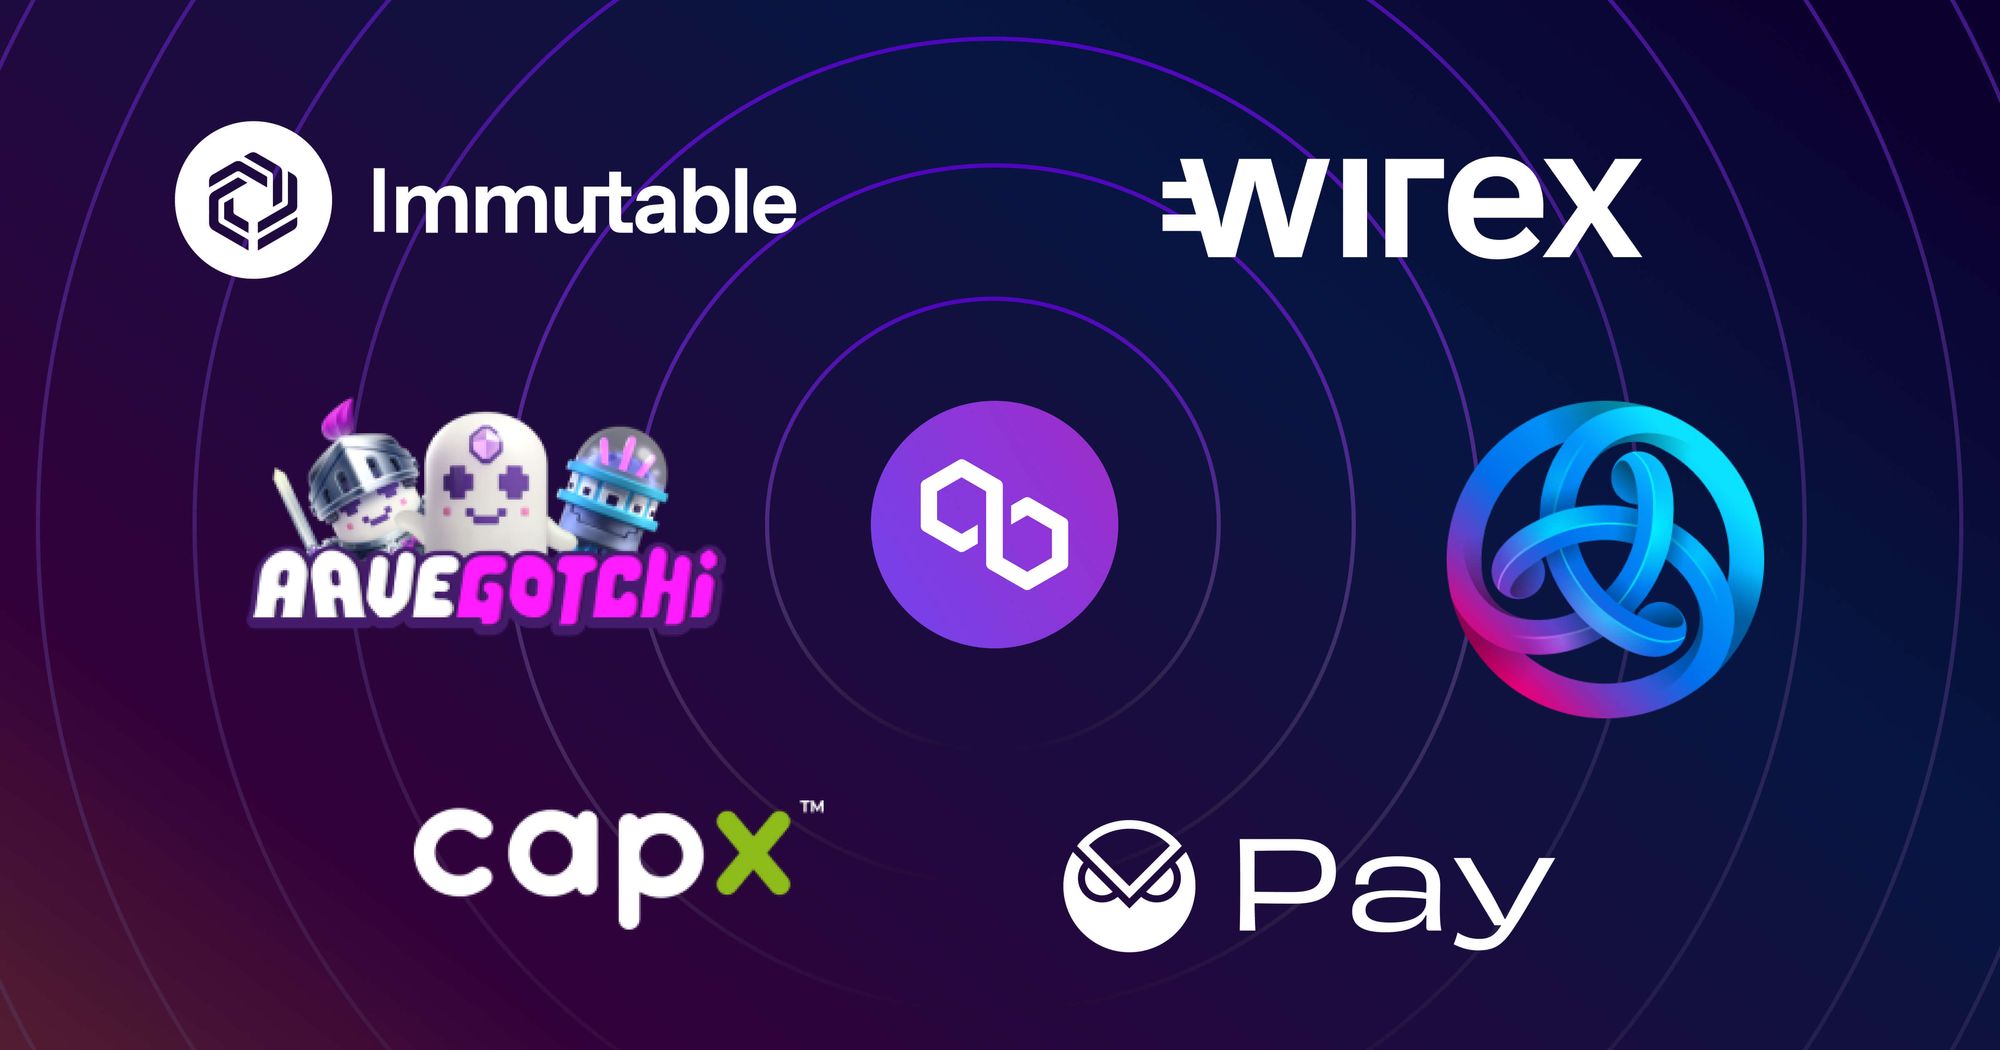 Wirex and Polygon CDK Join Forces to Revolutionize Digital Payments With  W-Pay – Press release Bitcoin News